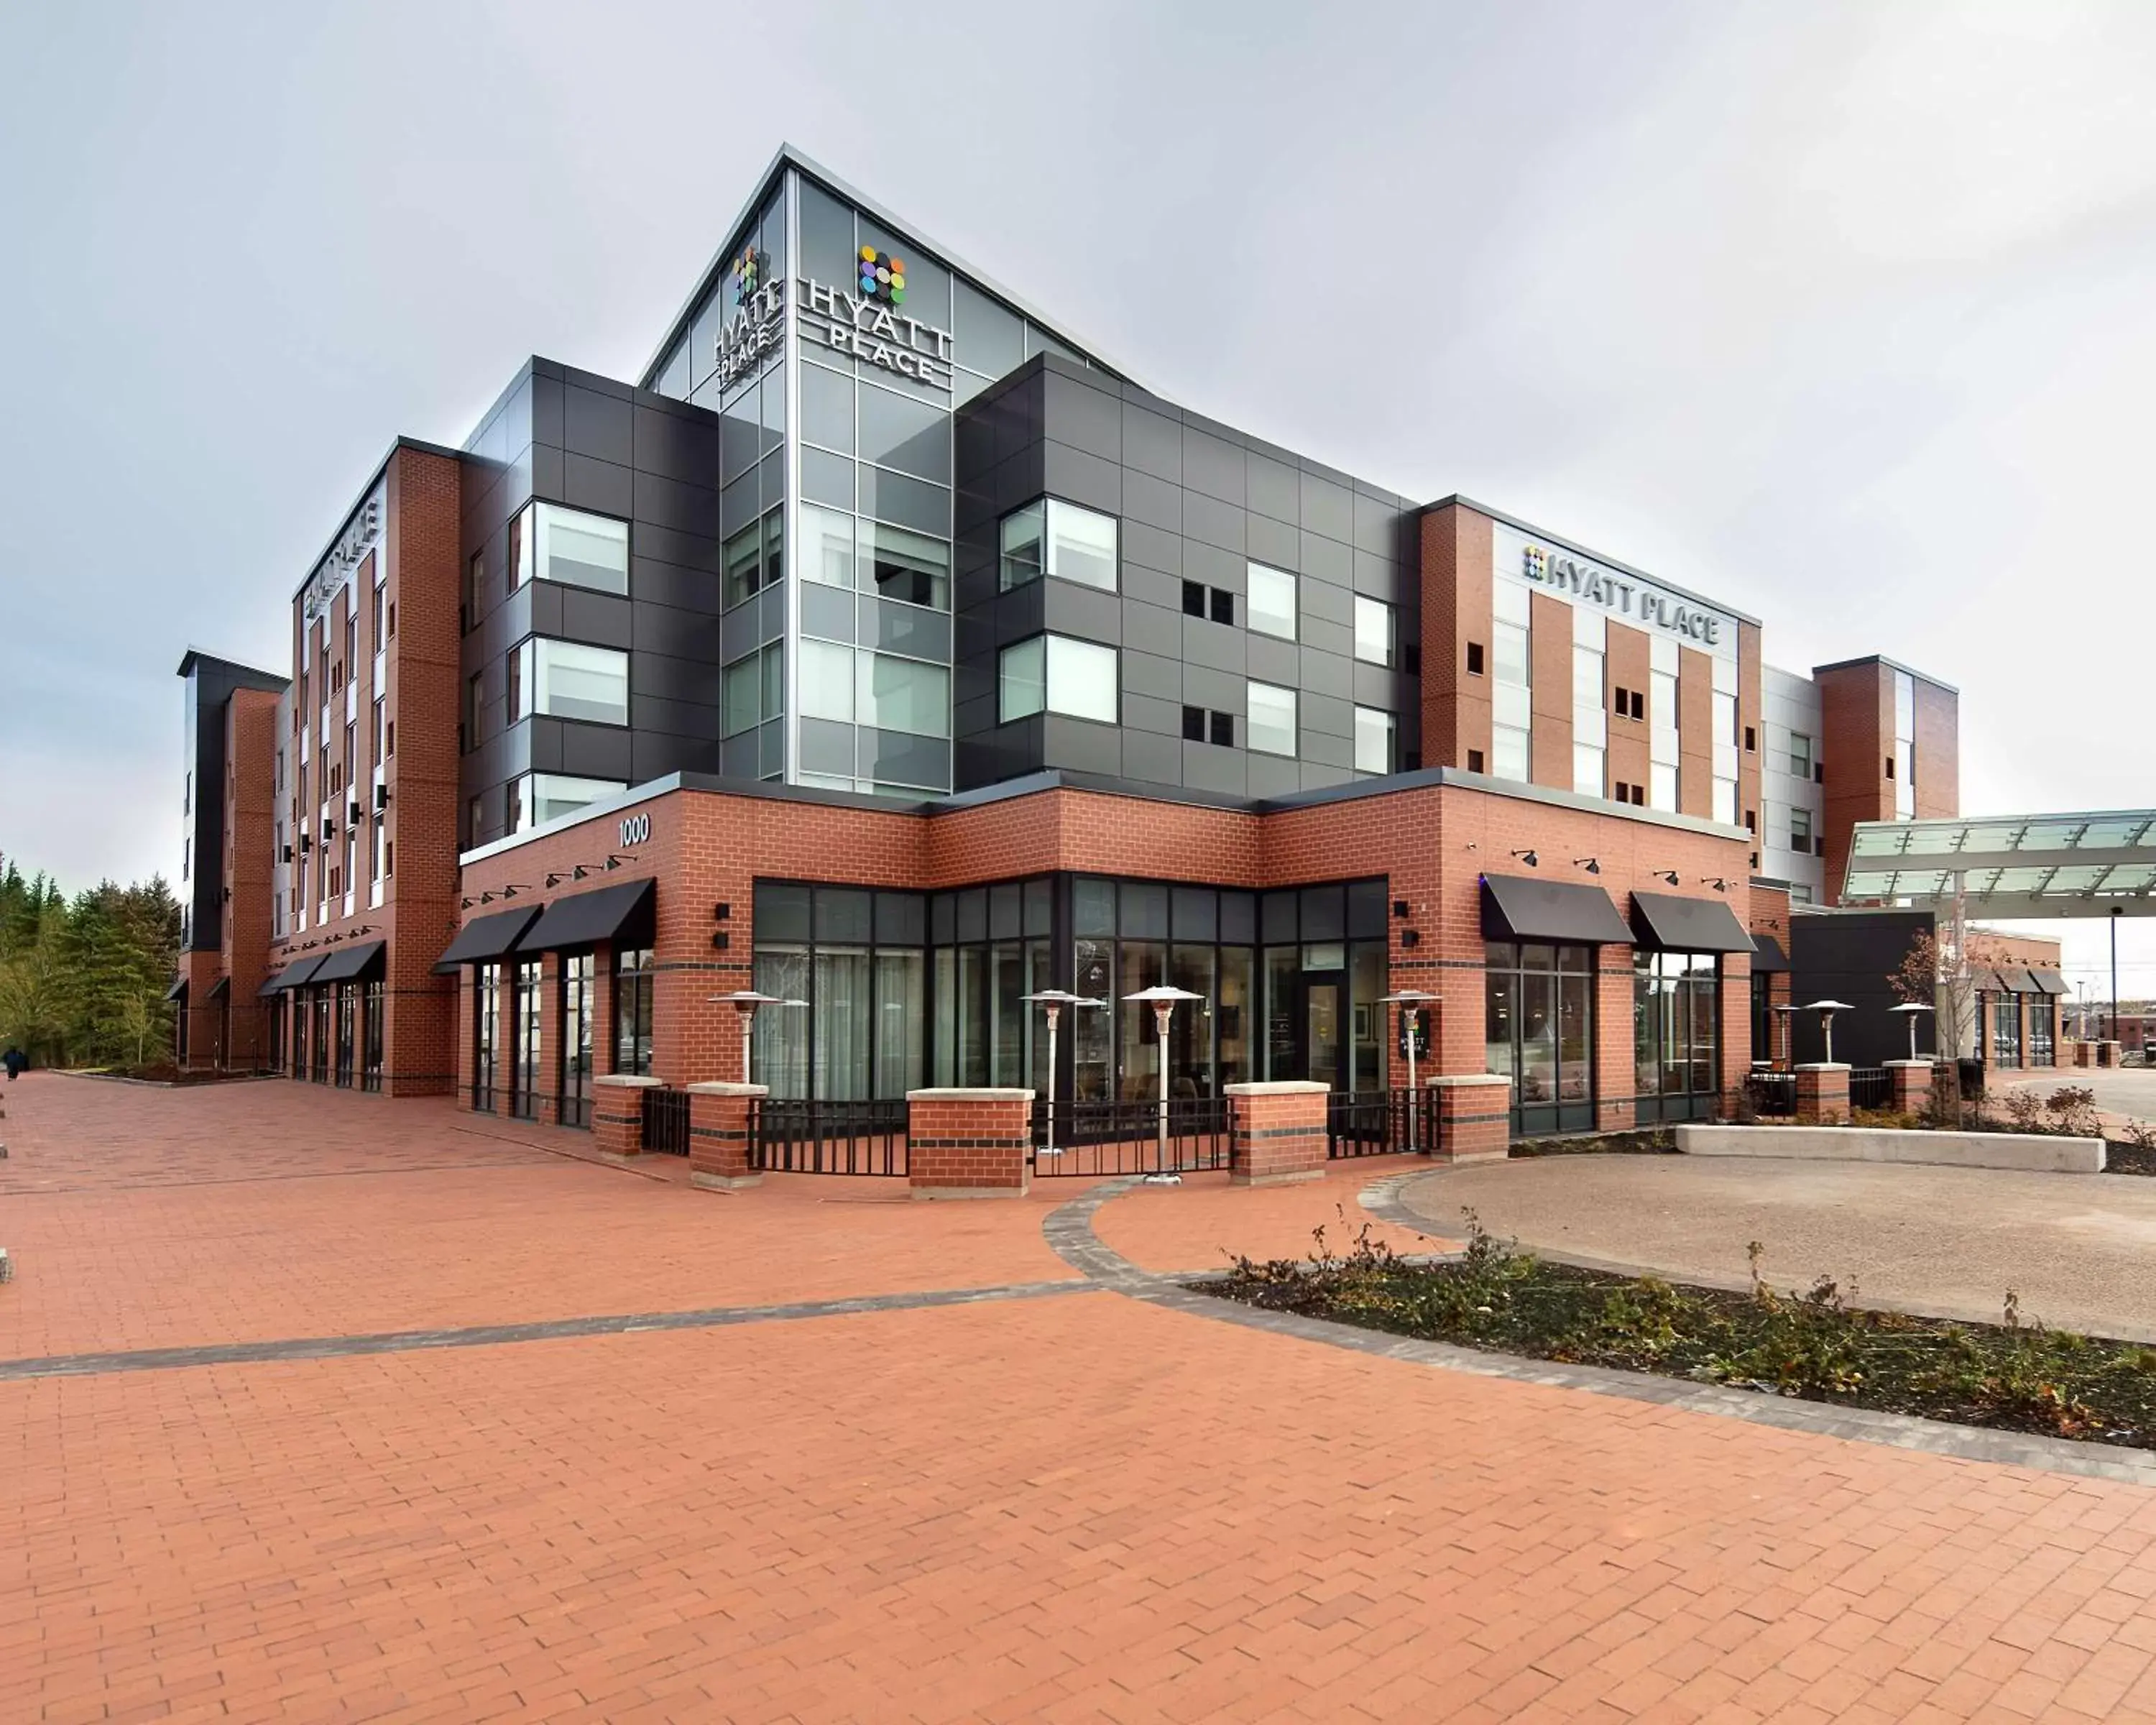 Property building in Hyatt Place Moncton-Downtown